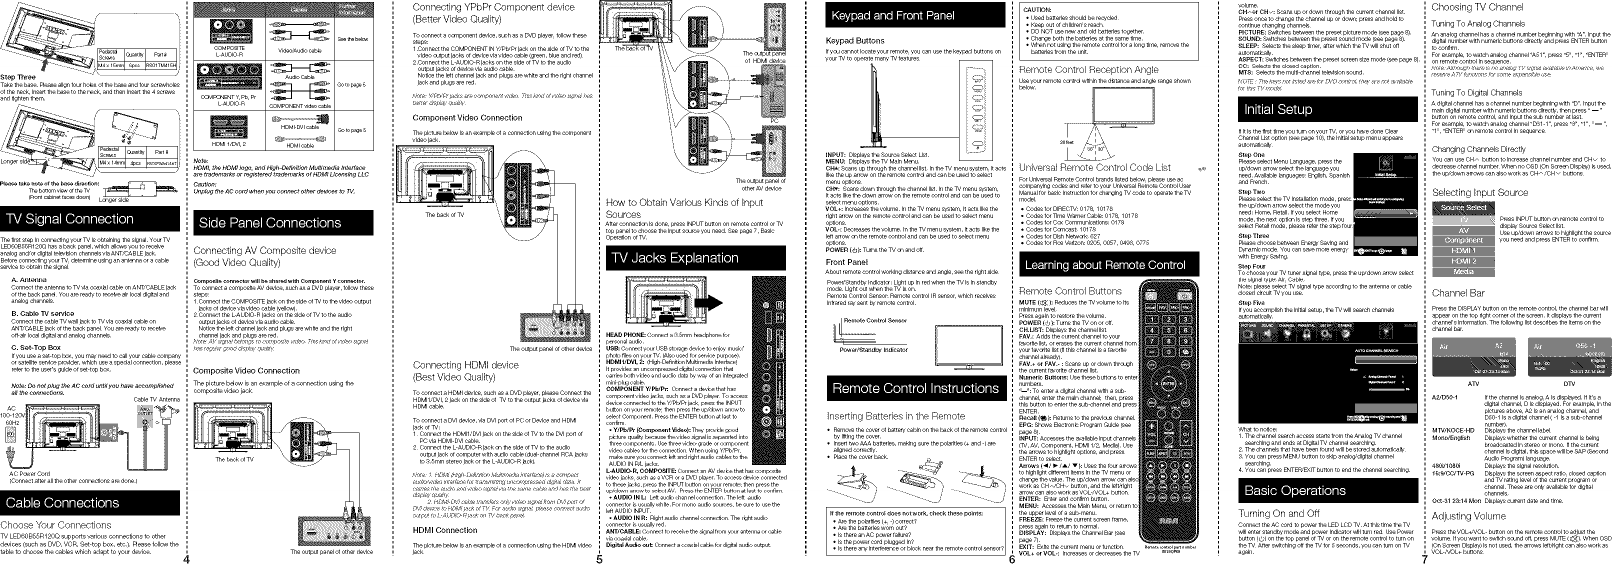 Page 2 of 4 - RCA LED60B55R120Q User Manual  LED TV - Manuals And Guides 1307131L